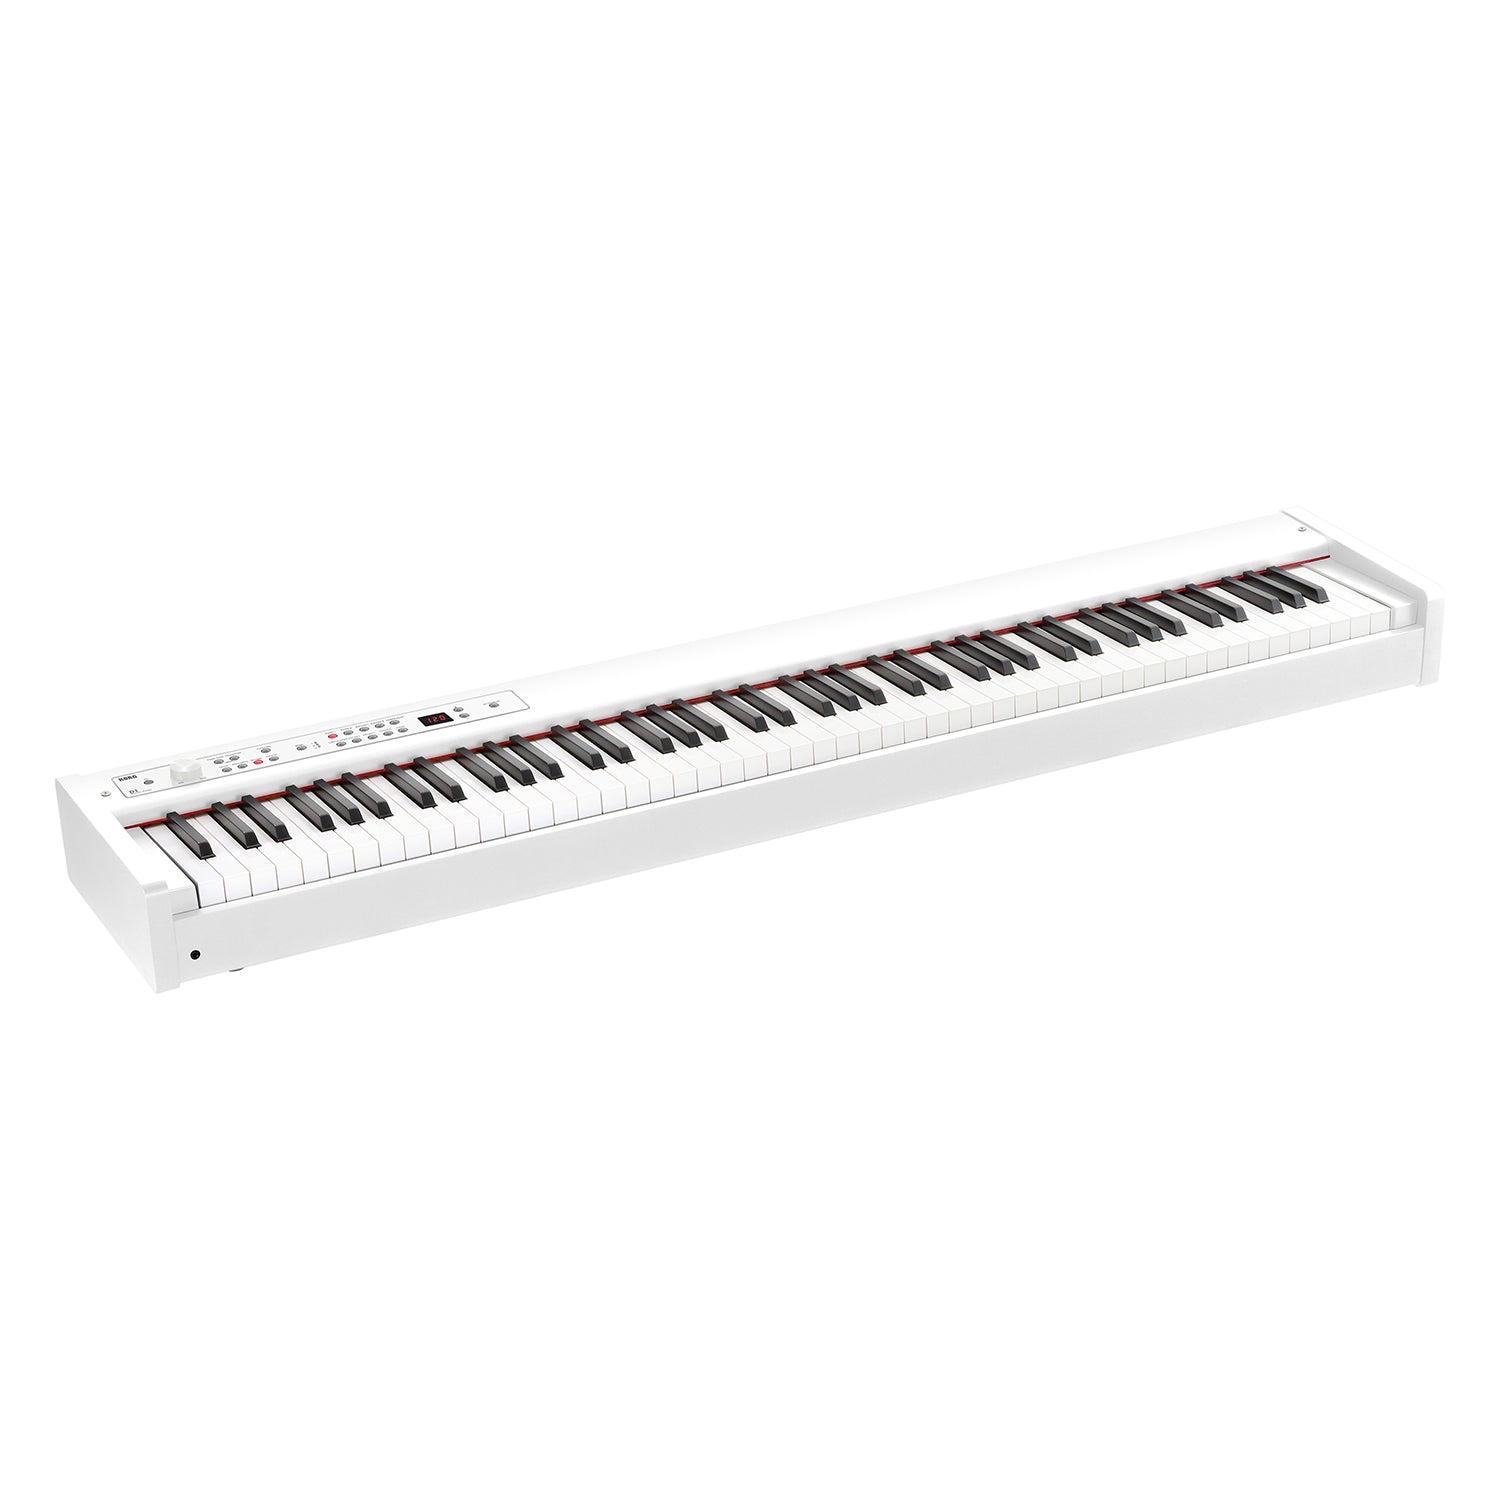 D1 Stage Piano - White KORG USA Official Store